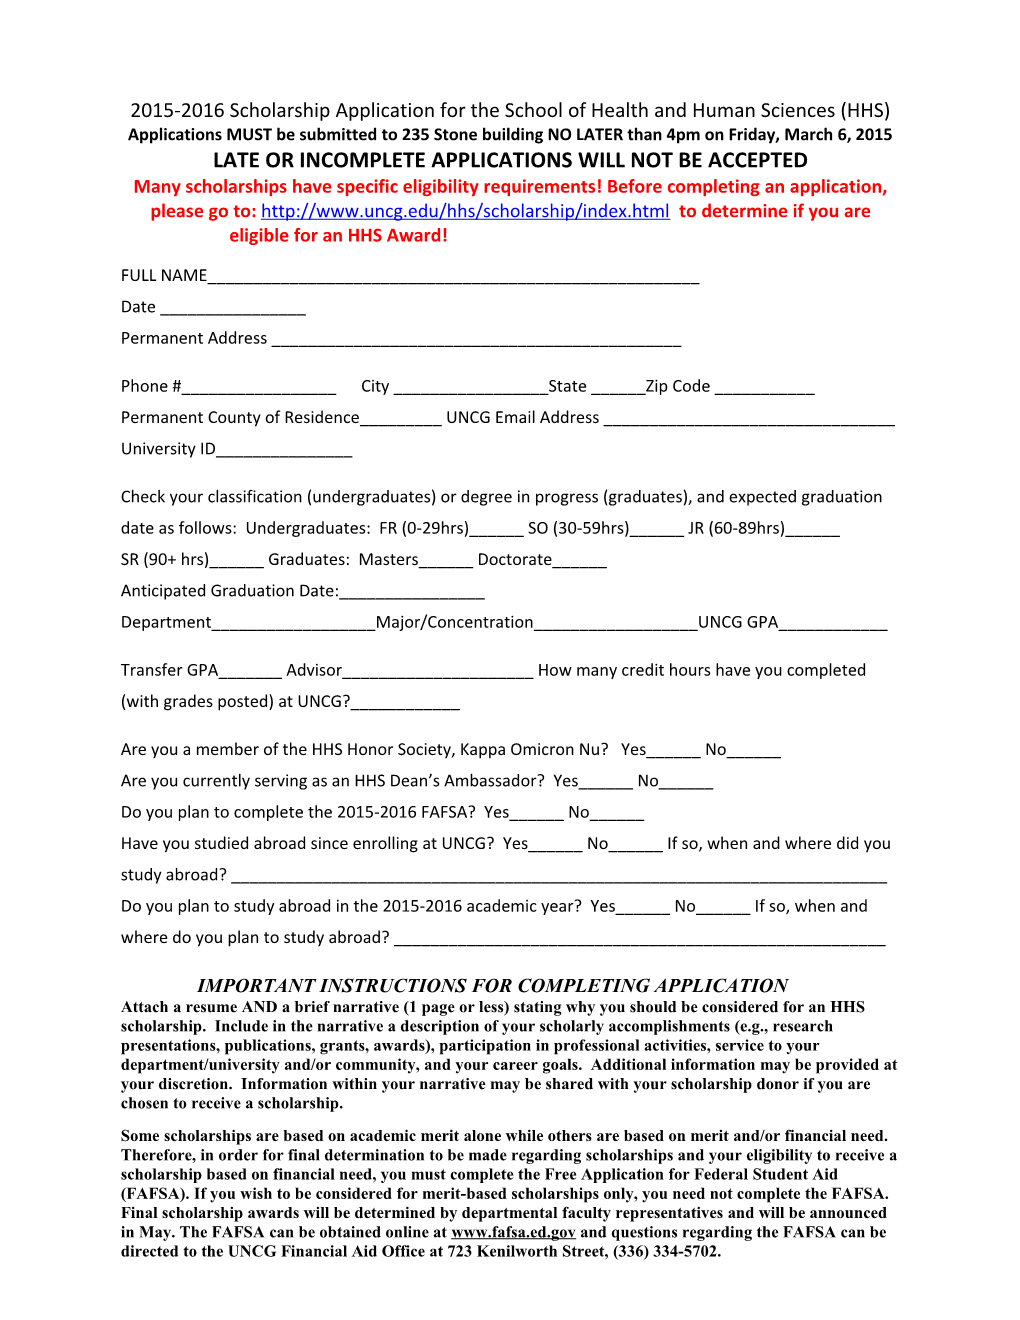 2015-2016 Scholarship Application for the School of Health and Human Sciences (HHS) Applications